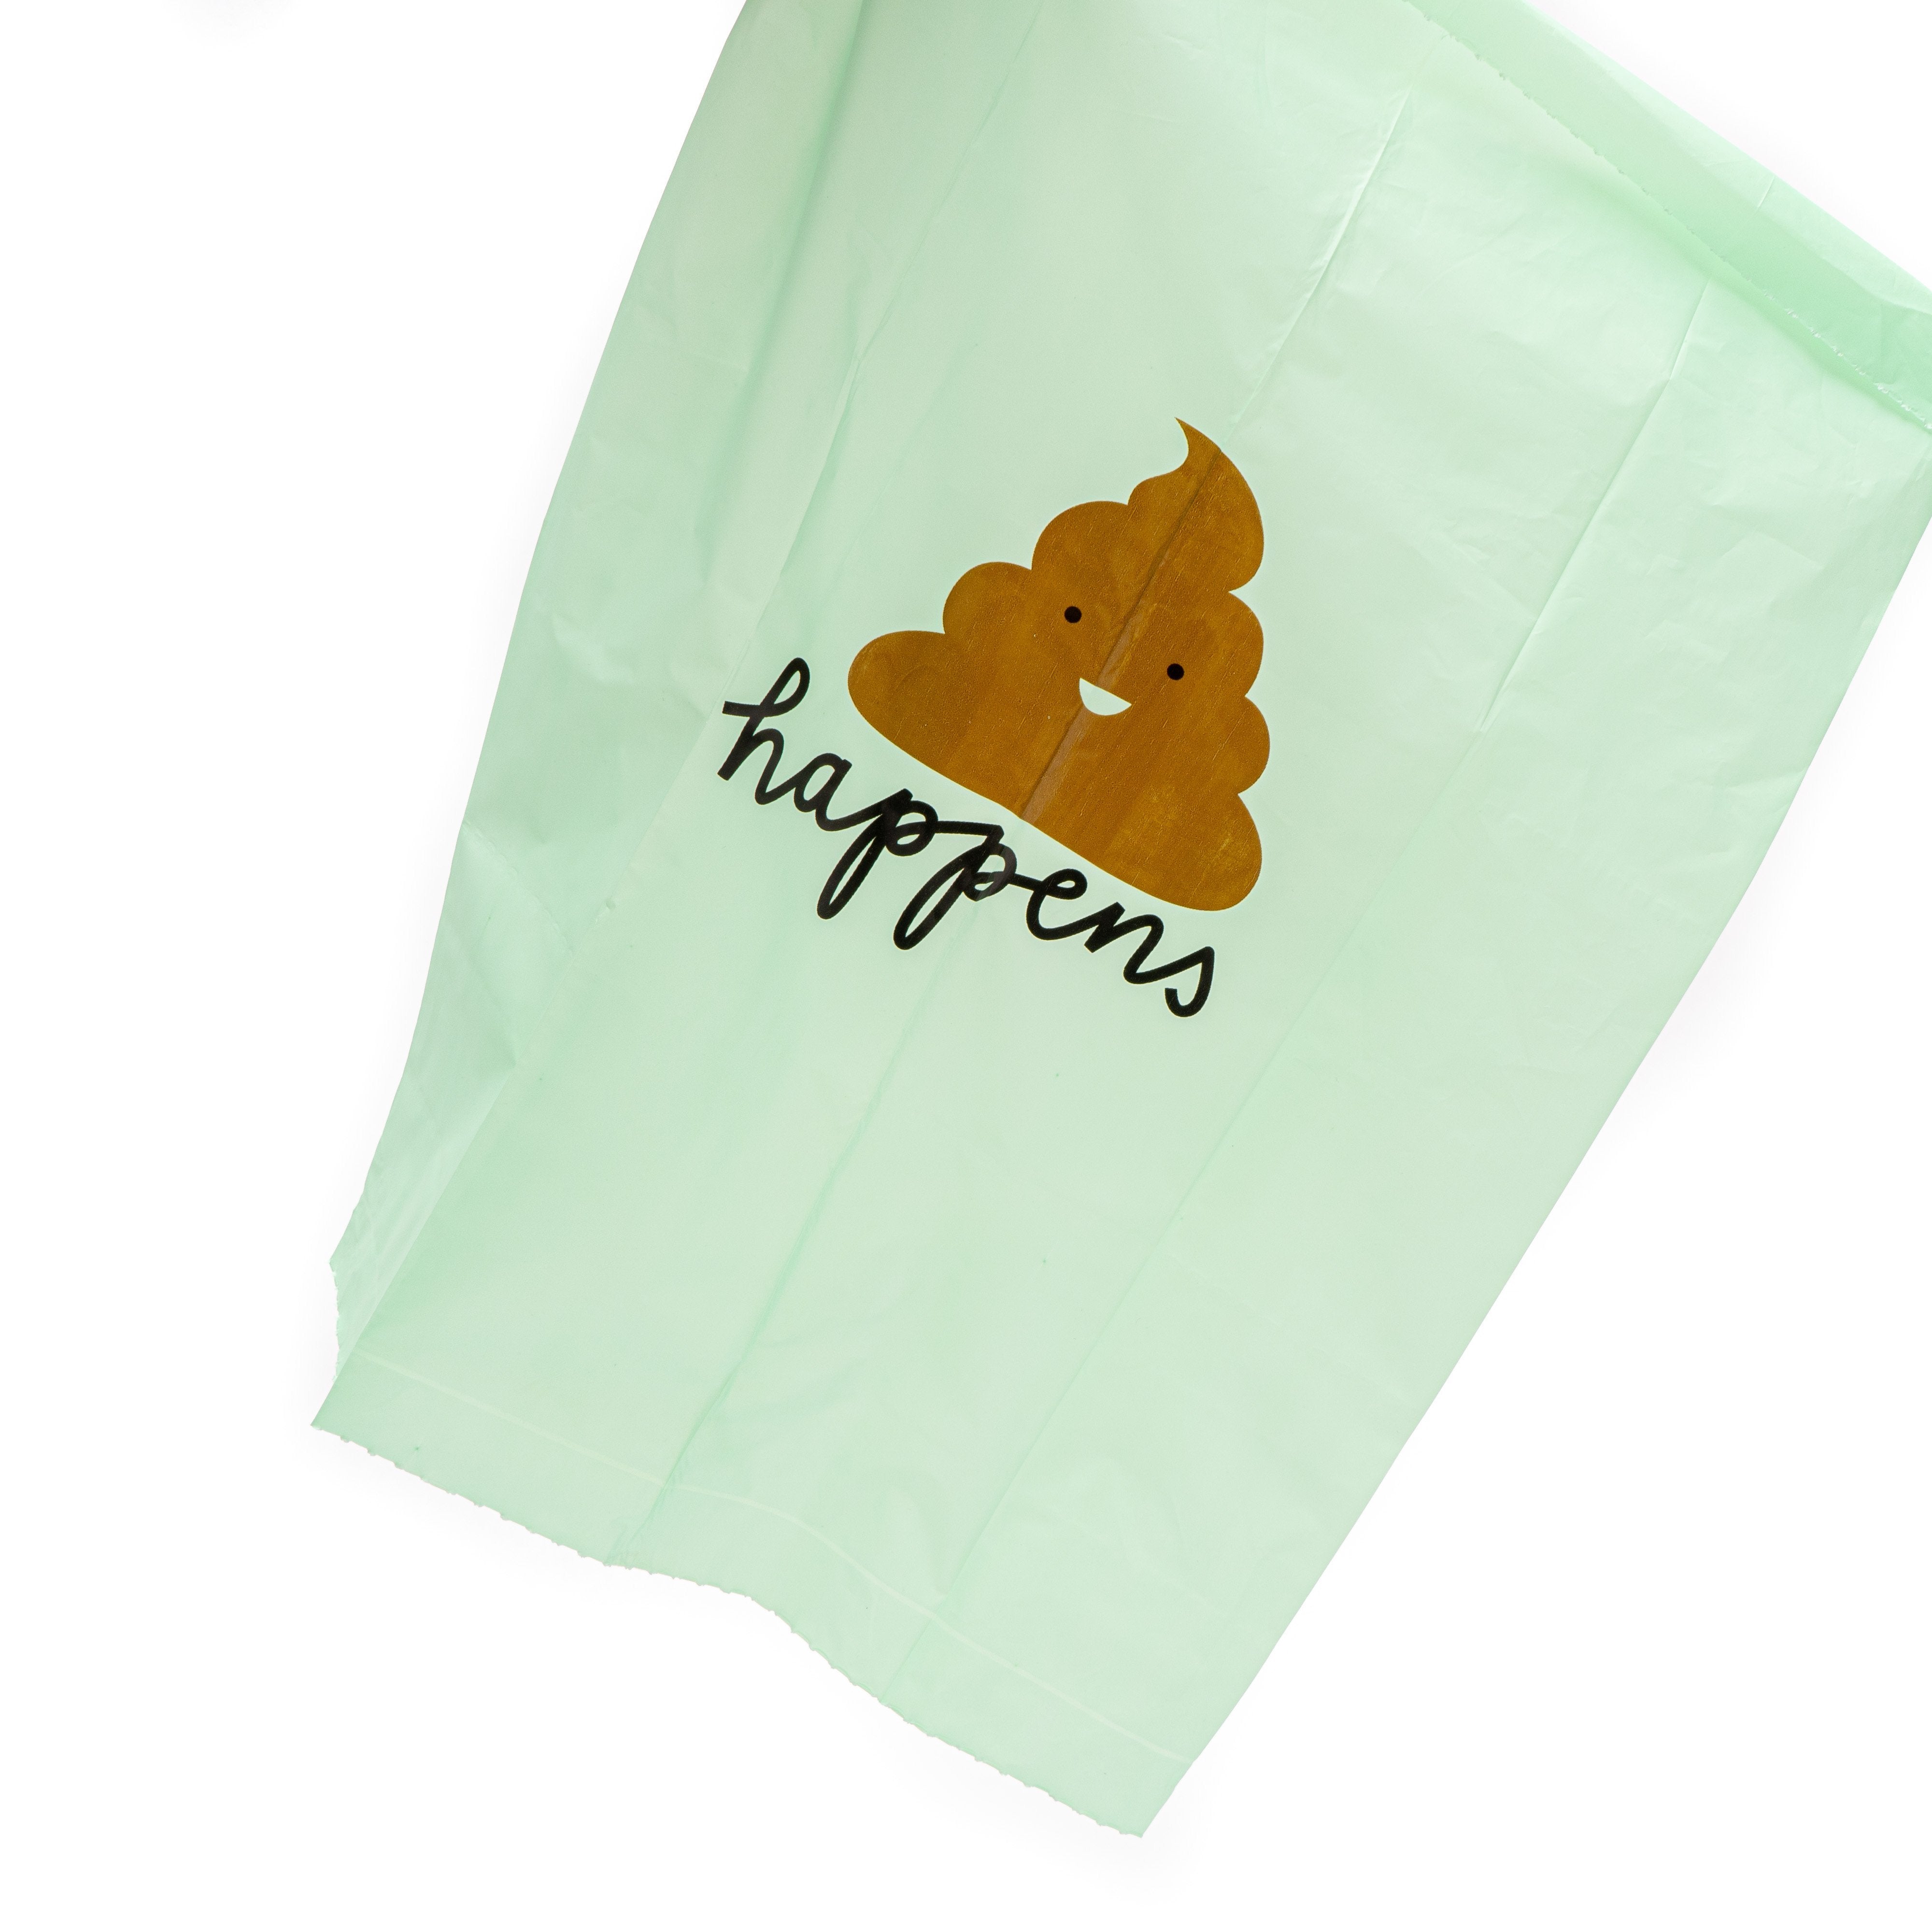 Smarter Biodegradable Handled Bags Size 9X18inch Pack 50pcs. | Tops online